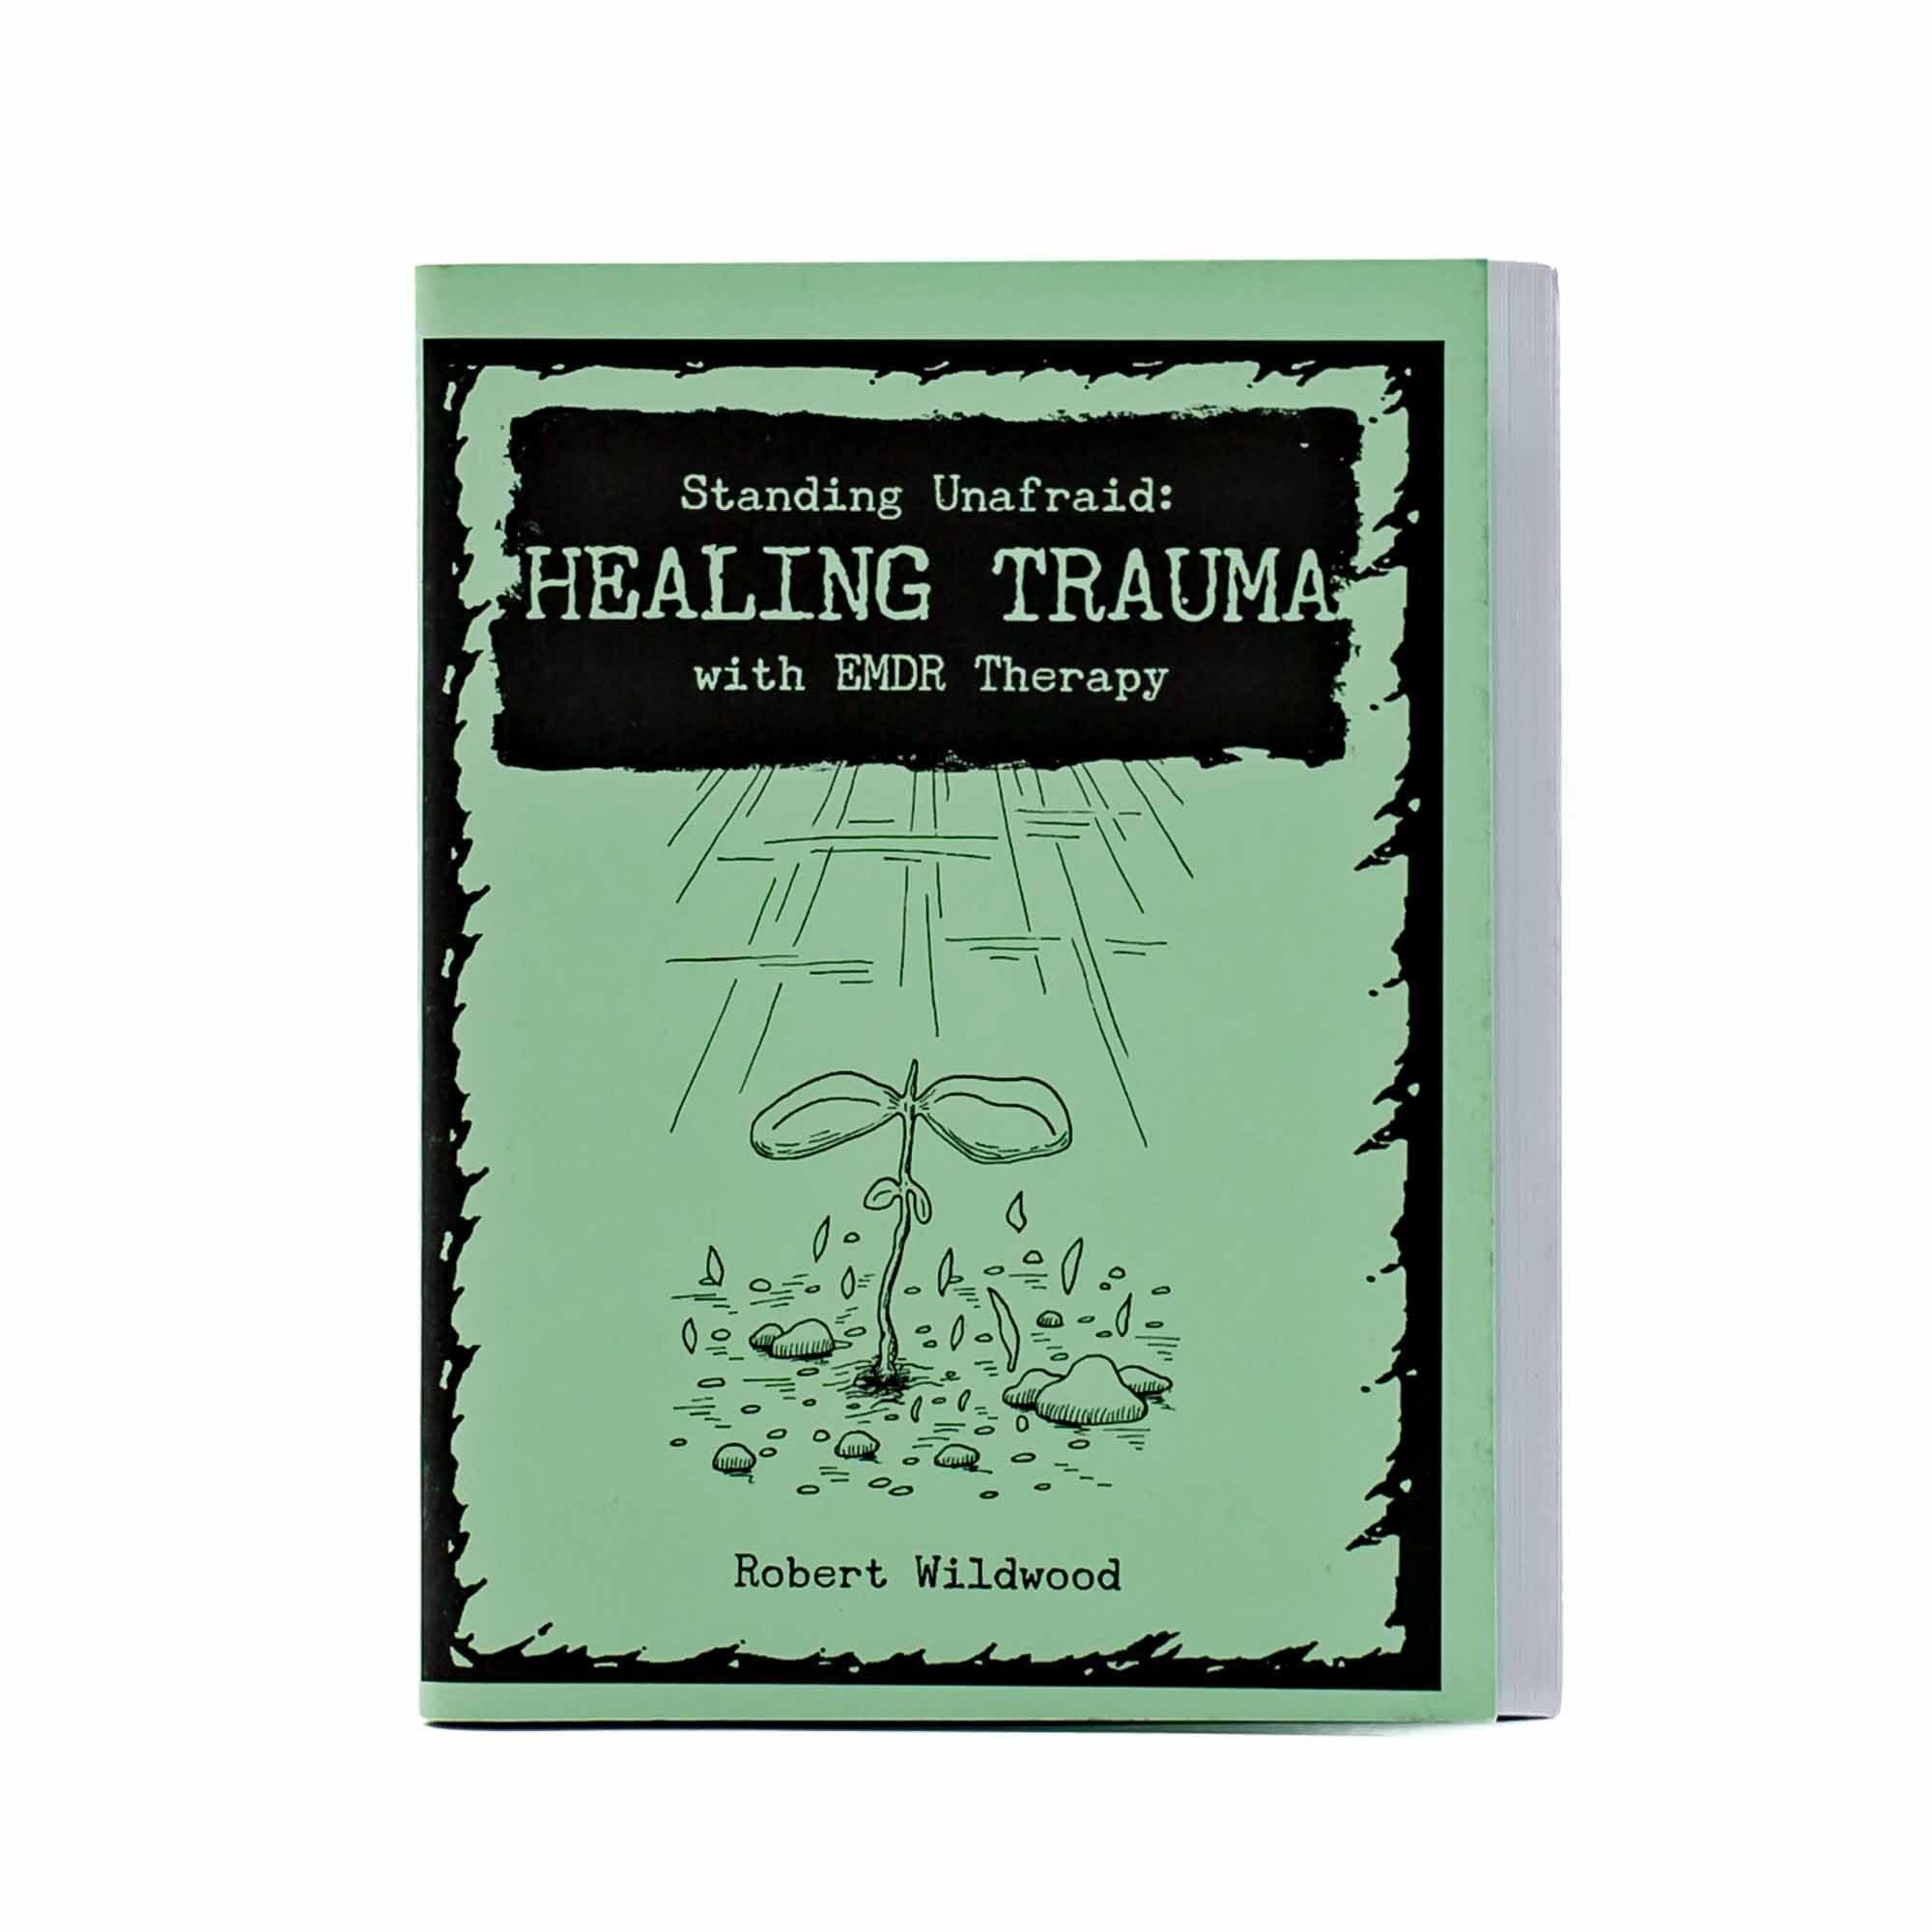 Standing Unafraid: Healing Trauma with EMDR Therapy by Robert Wildwood - Mortise And Tenon